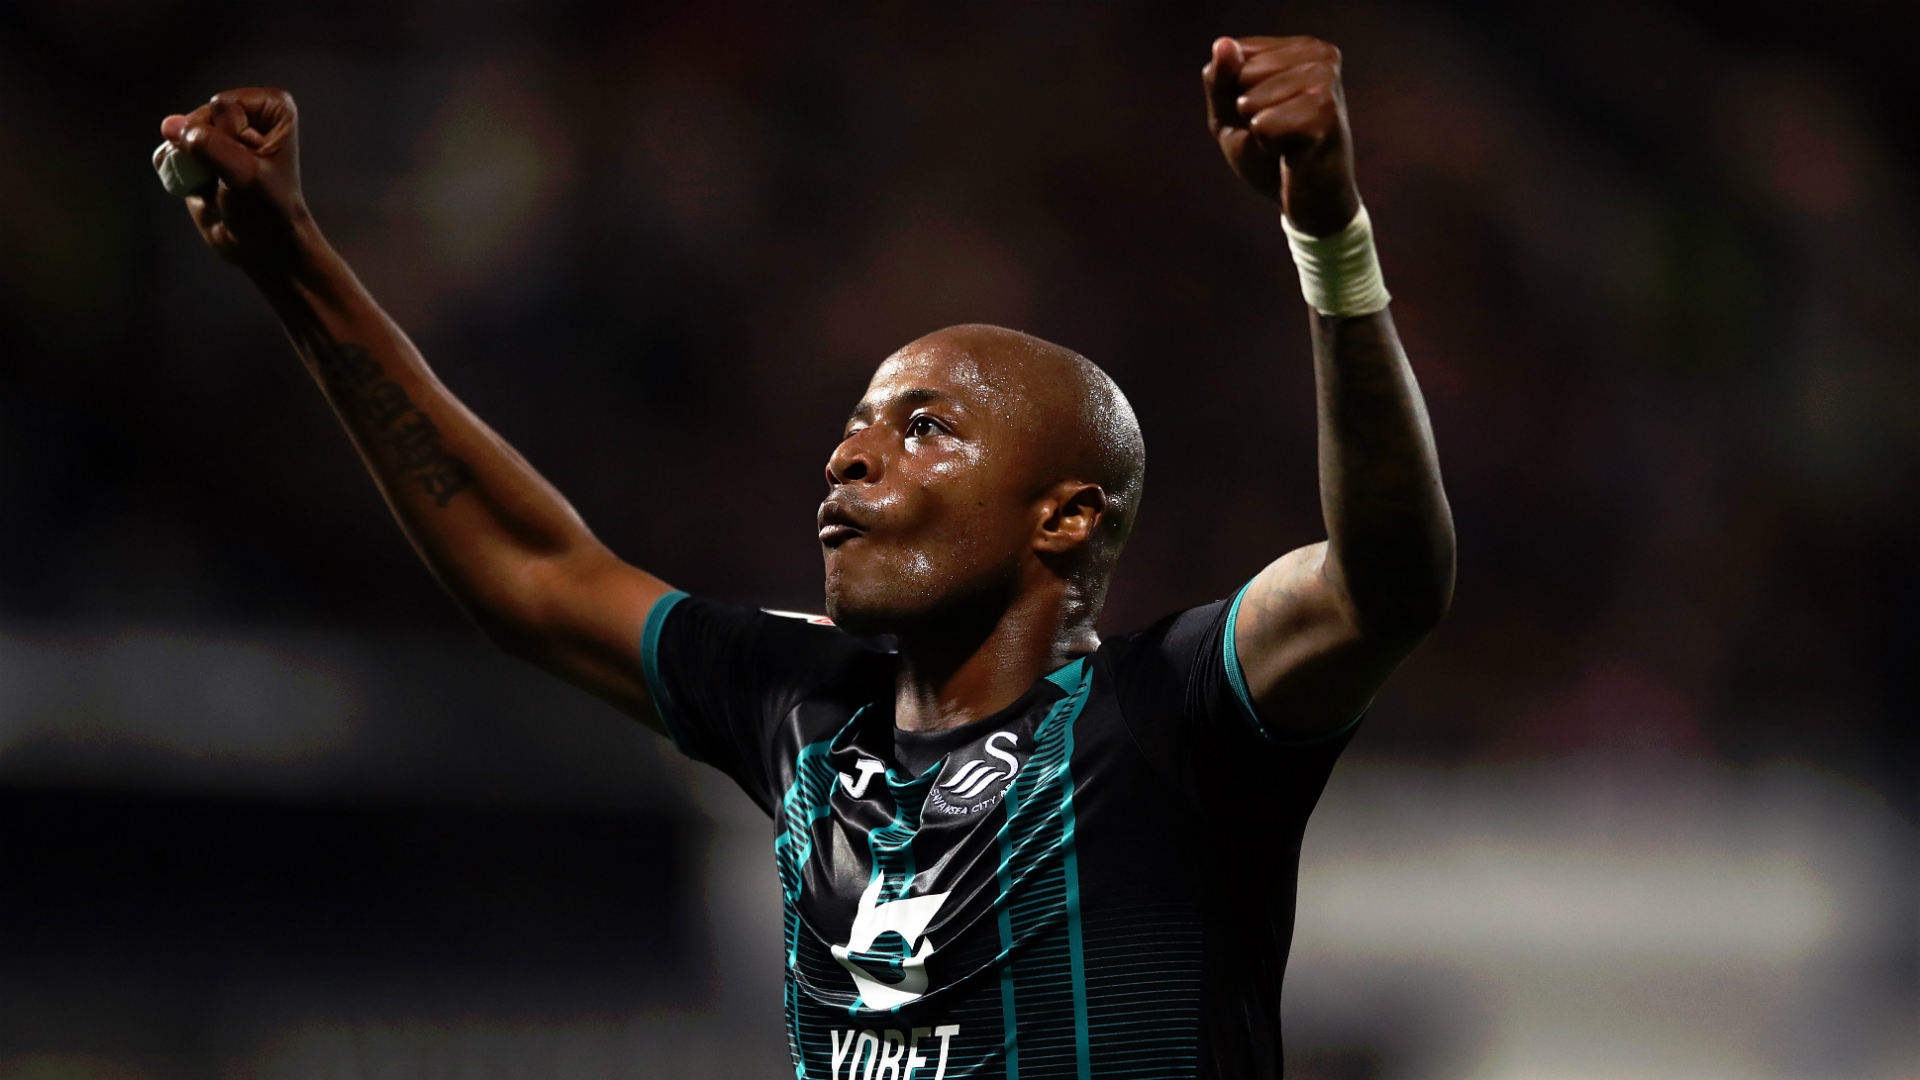 Andre Ayew brace seals comfortable 3-1 win for Swansea City over Middlesbrough